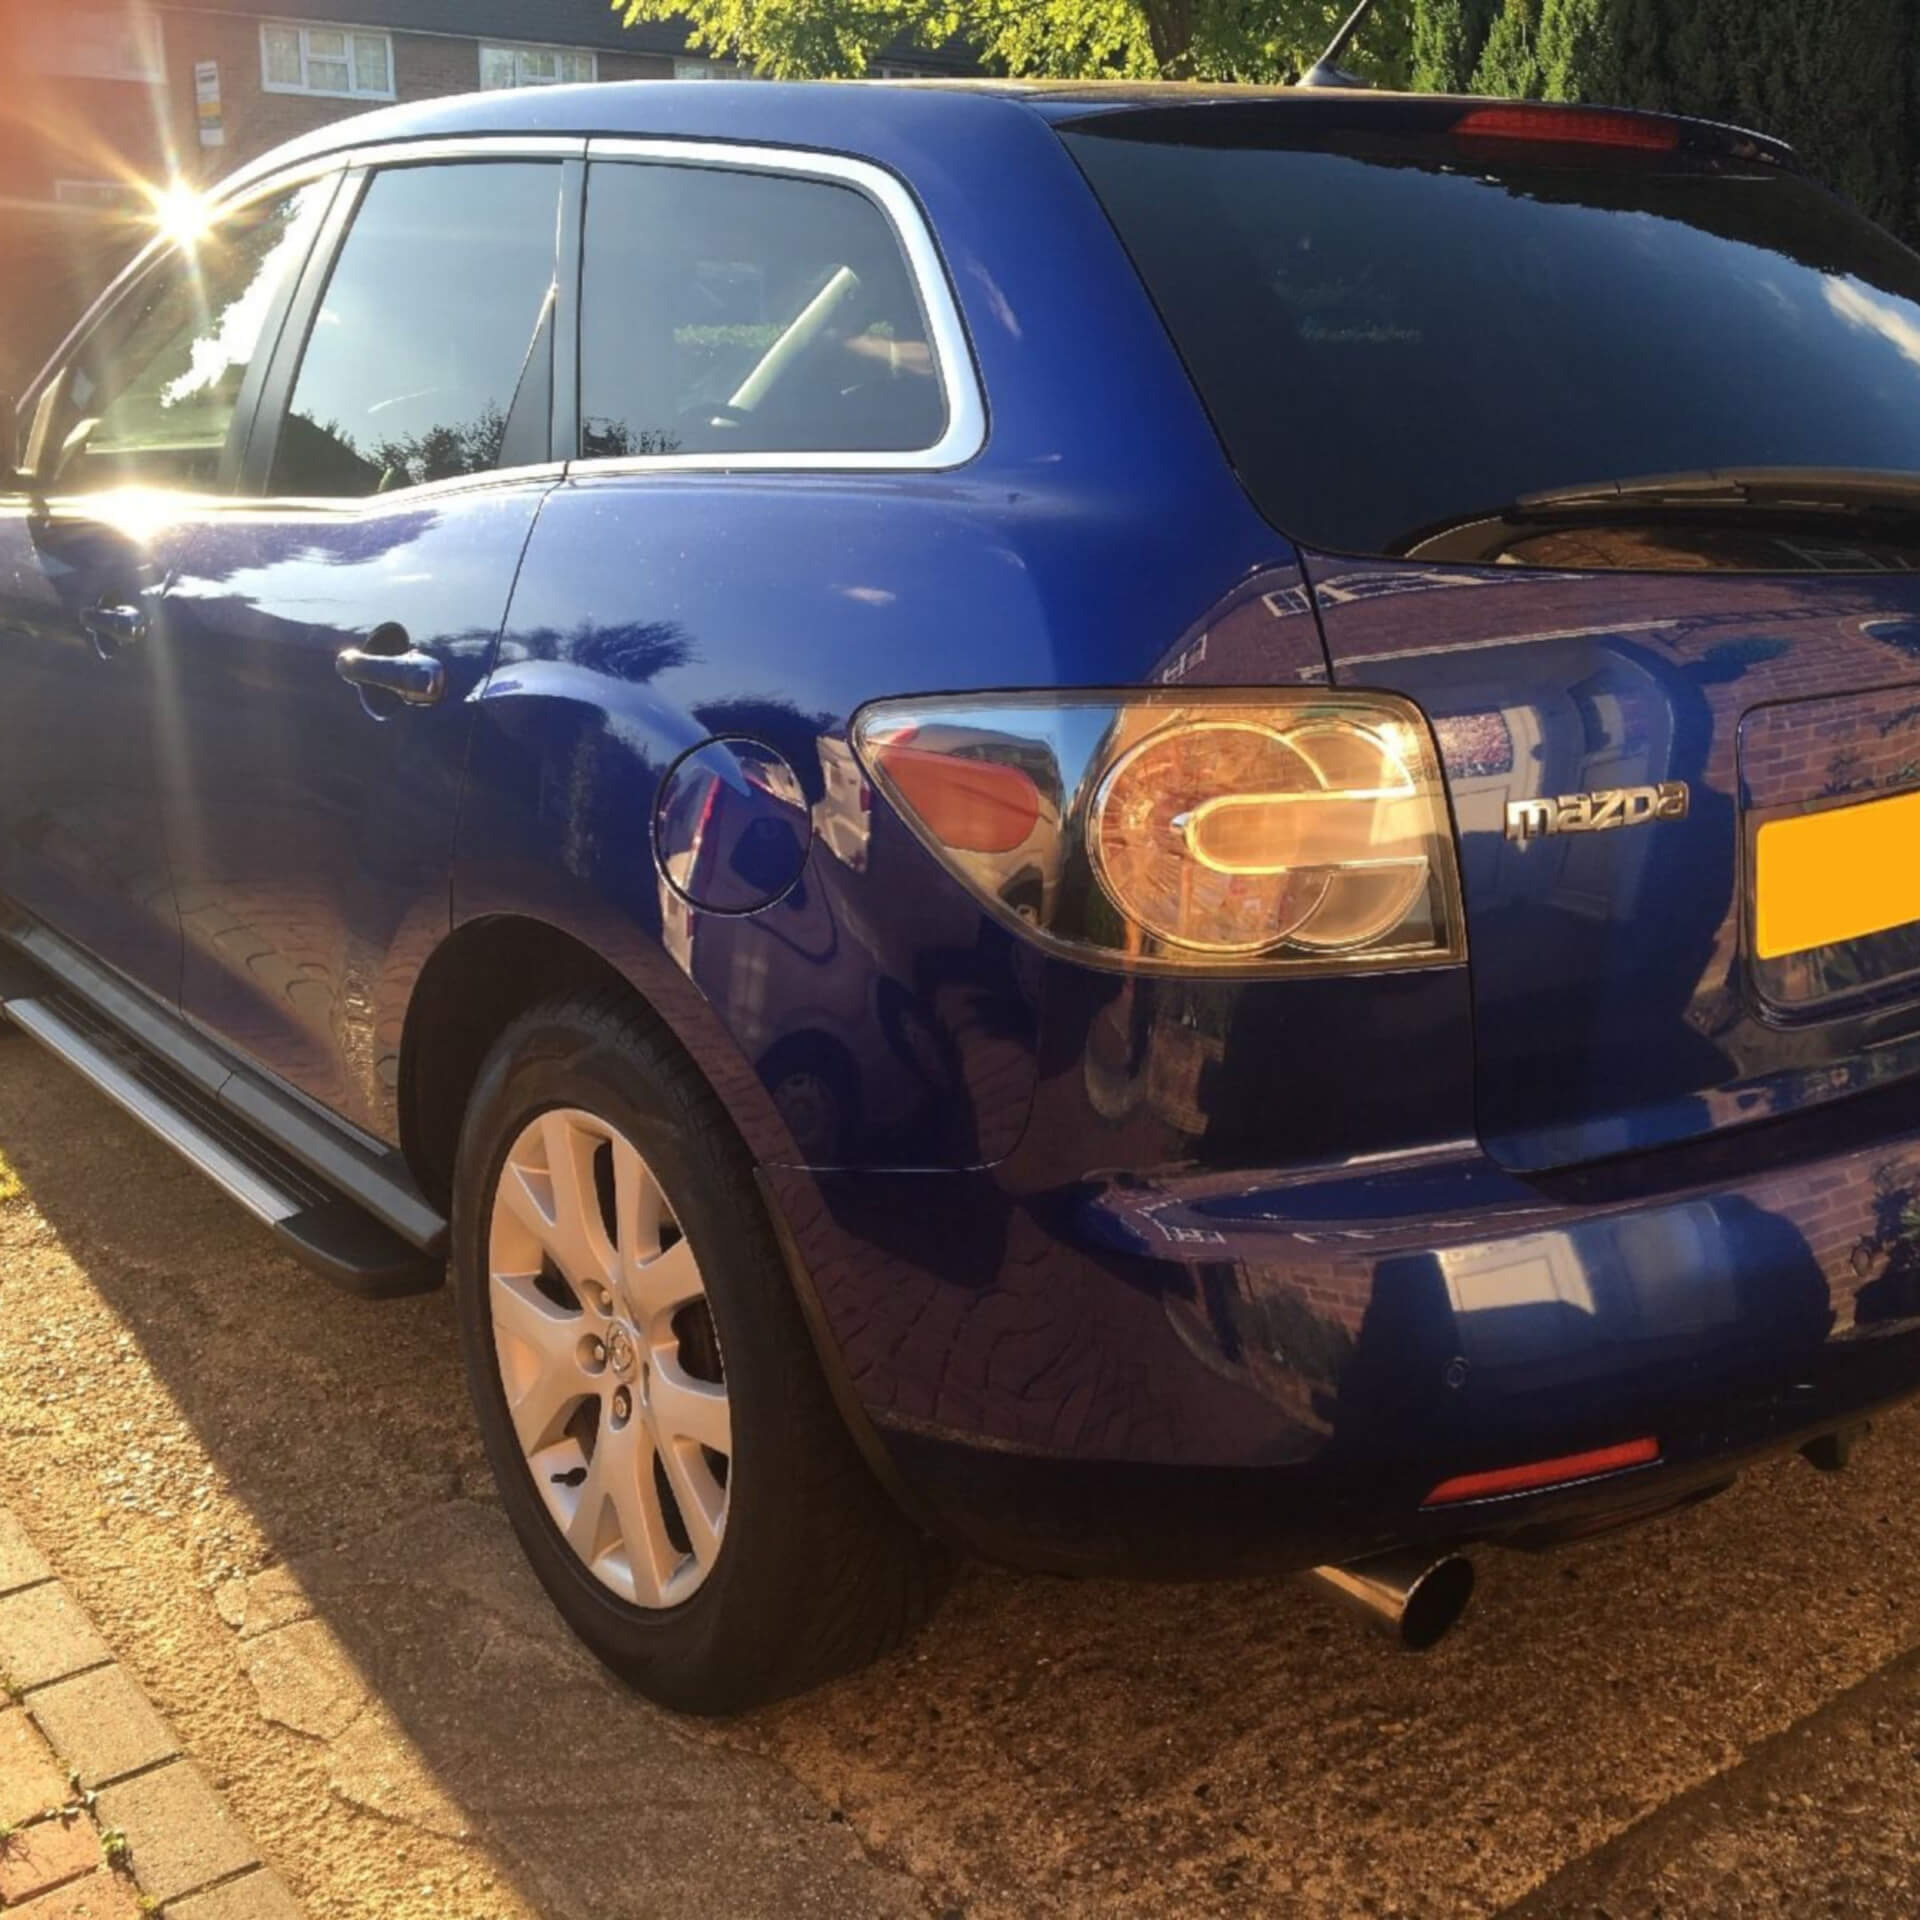 Direct4x4 accessories for Mazda CX-7 vehicles with a photo of a blue Mazda CX-7 parked on a driveway in the sun